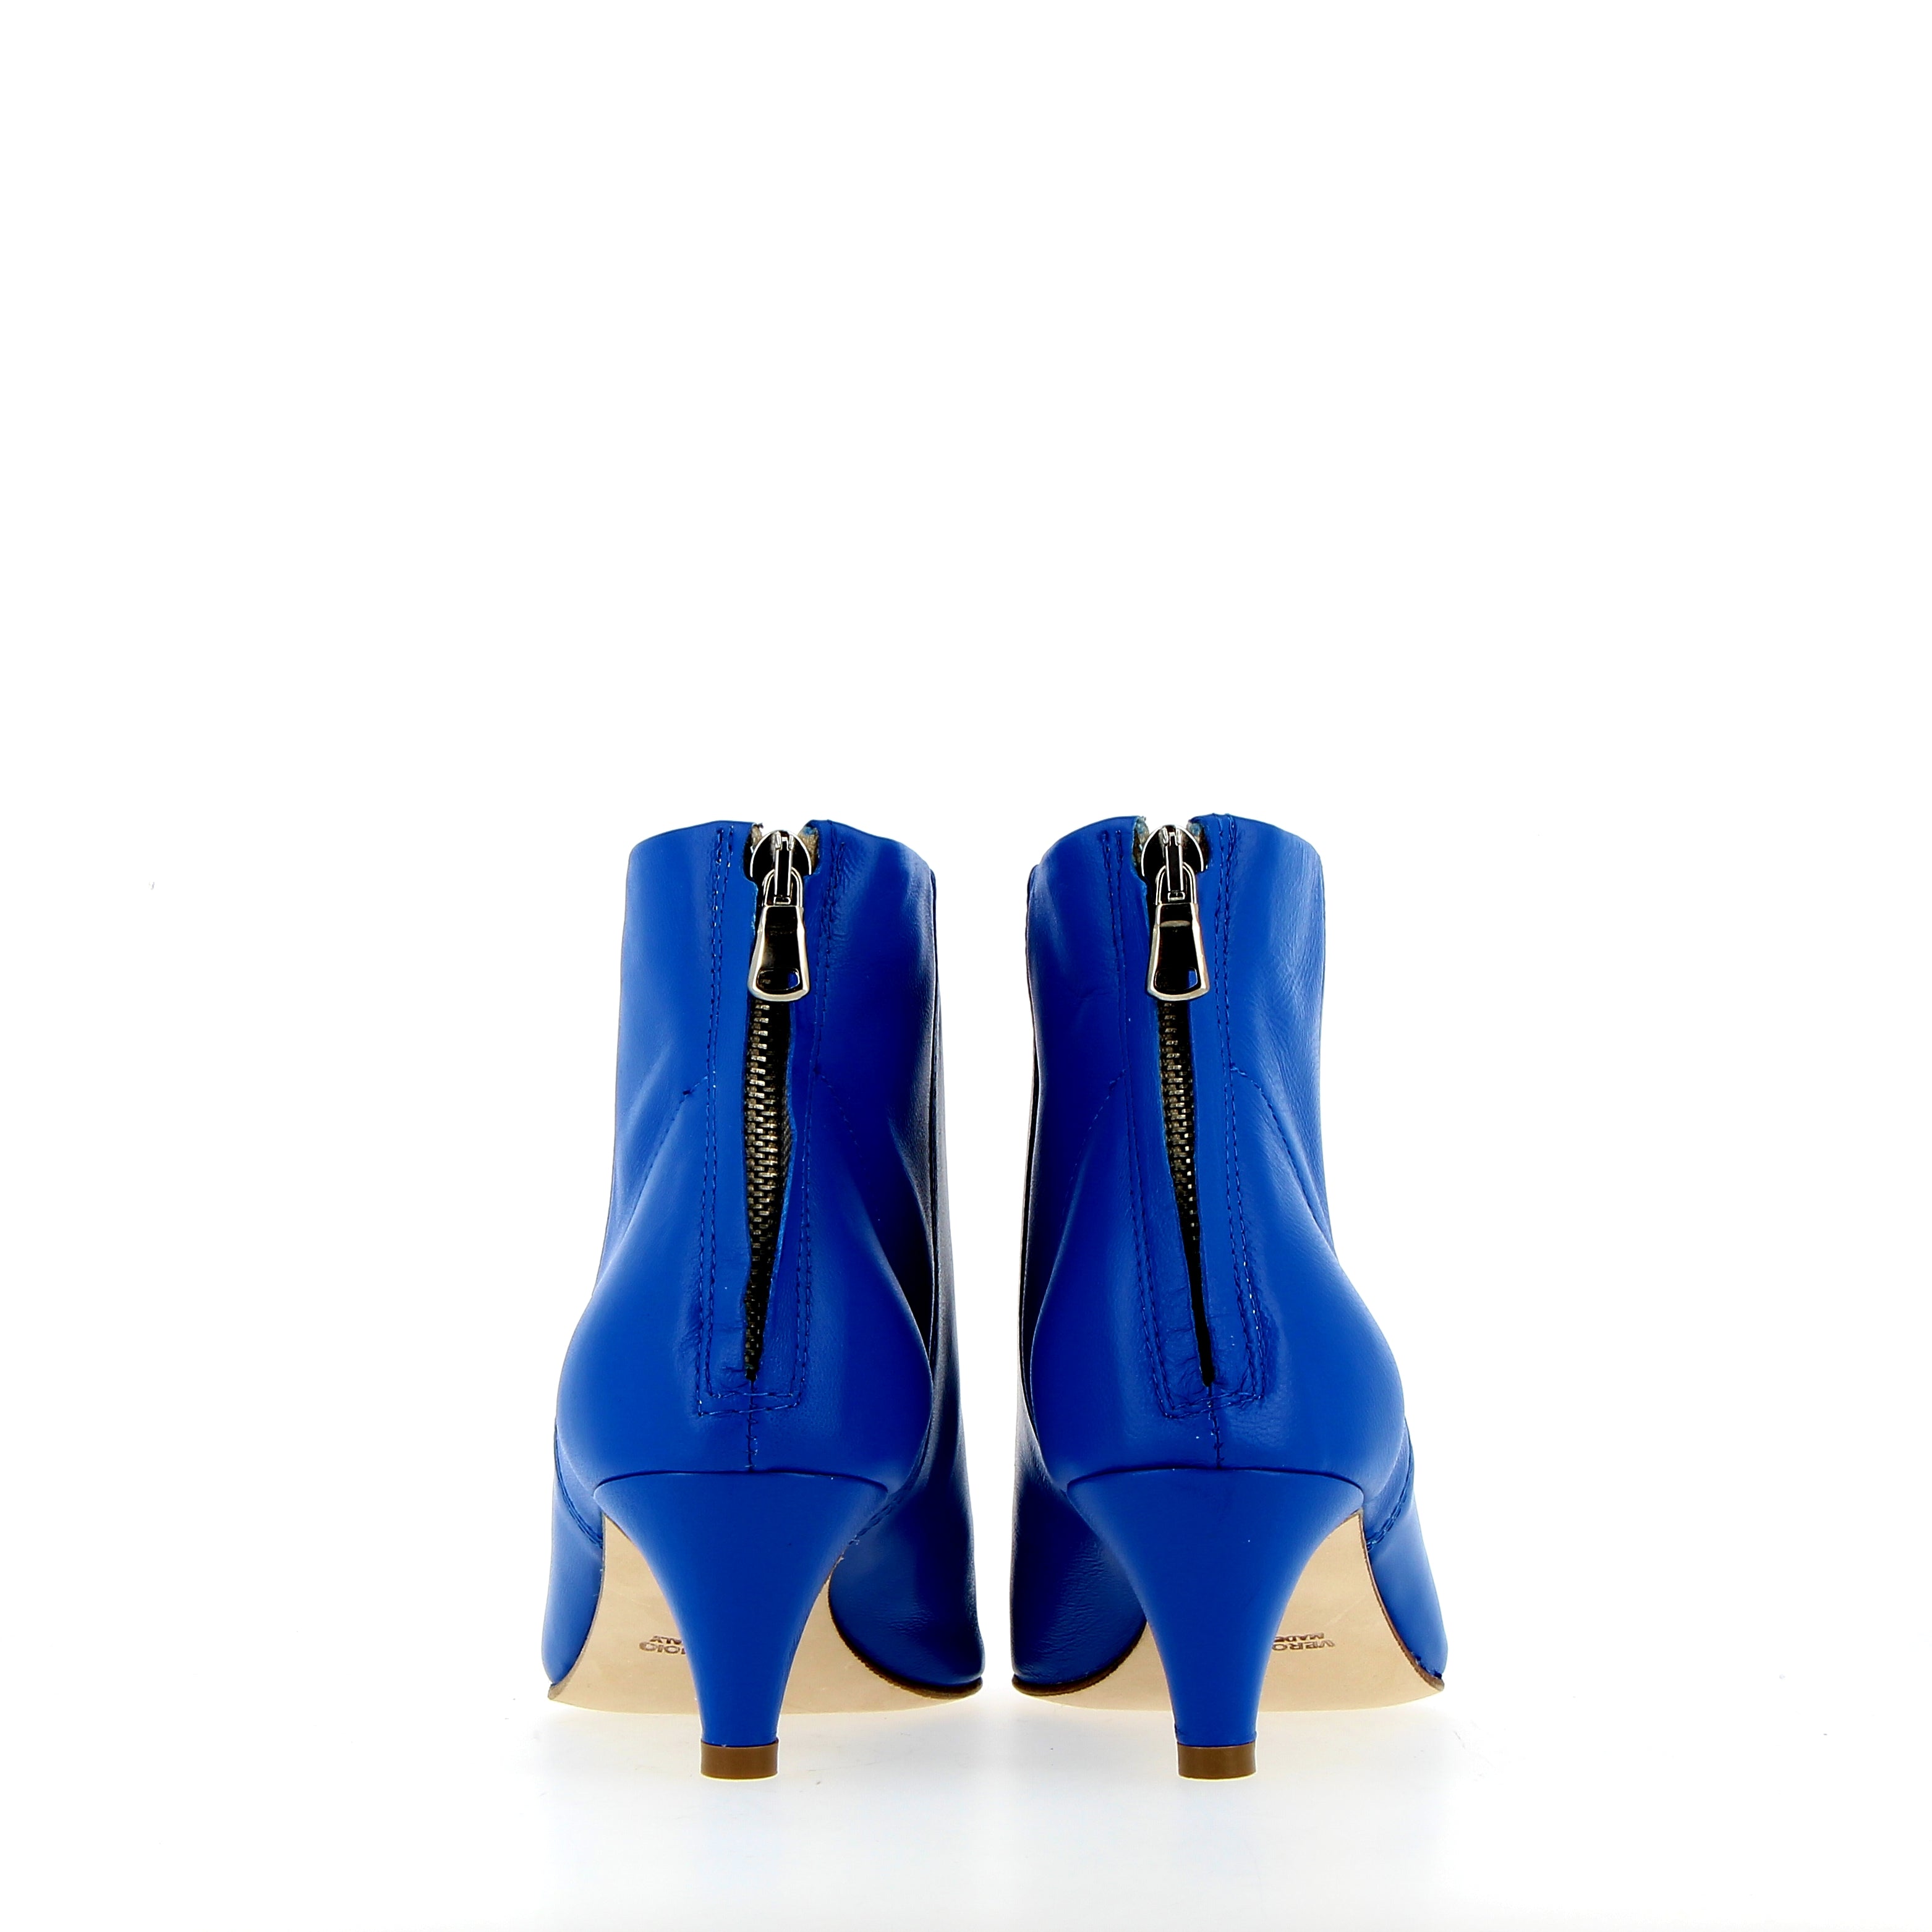 Ankle boot in soft denim blue leather